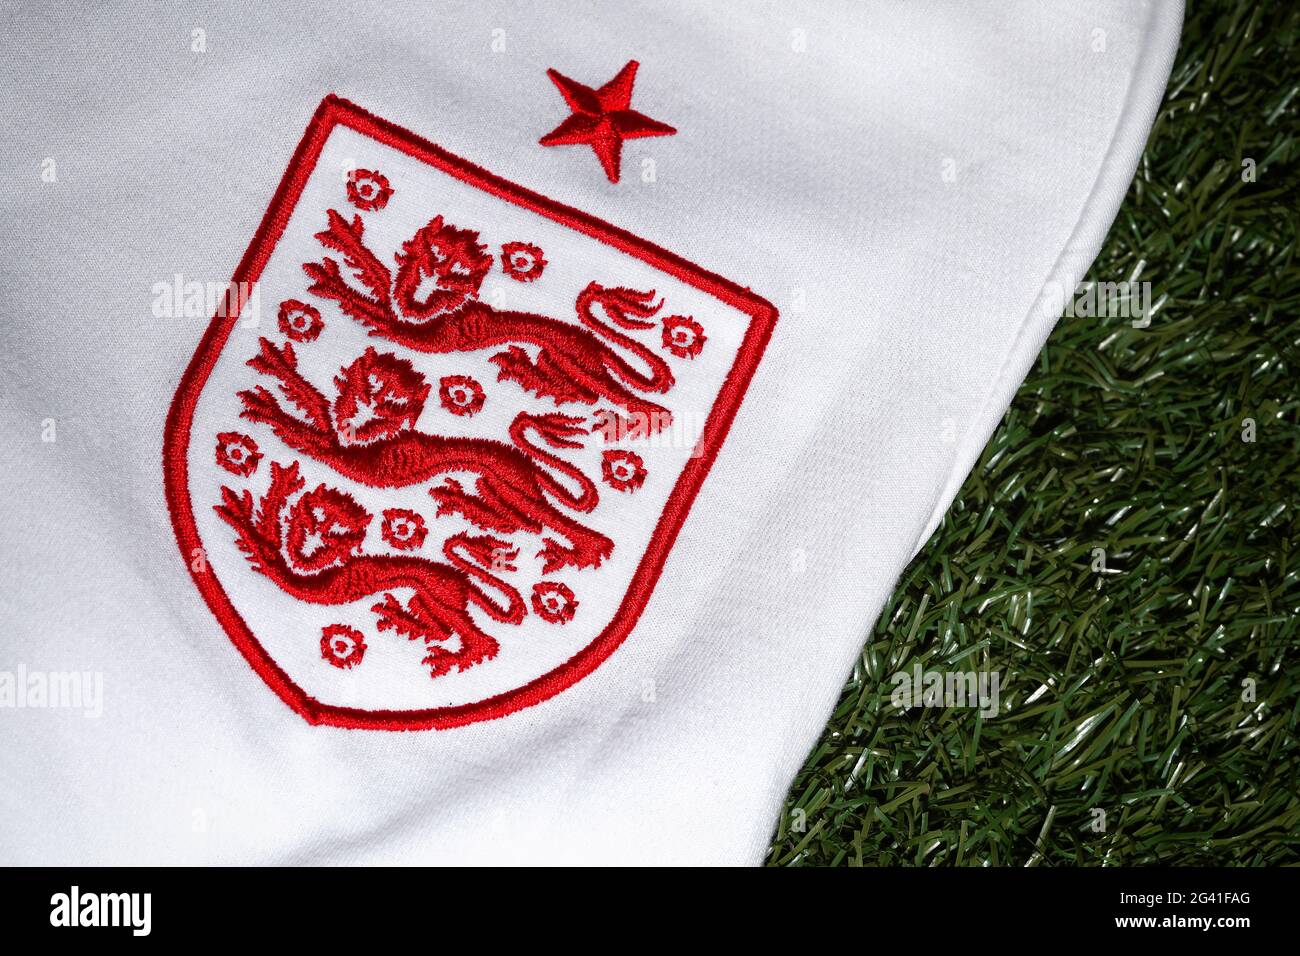 The UEFA Respect badge on an England home shirt on June 16, 2021